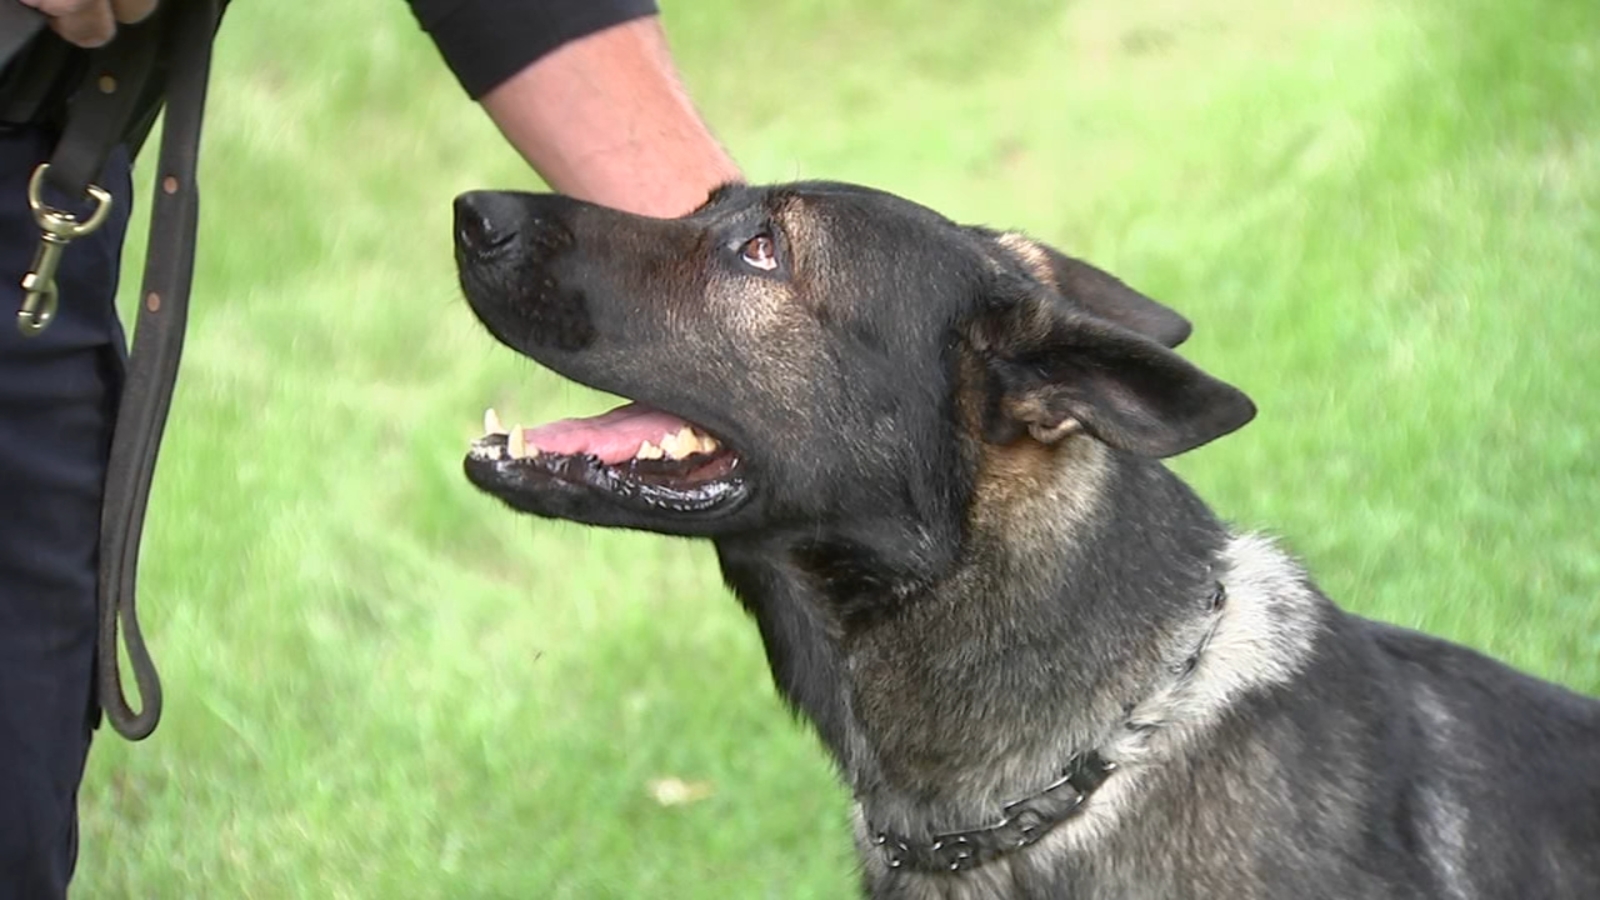 Lake County Sheriff’s Office K9 Deputy Dax retires after serving 9 years with Deputy John Forlenza, recovering from on-duty injury [Video]